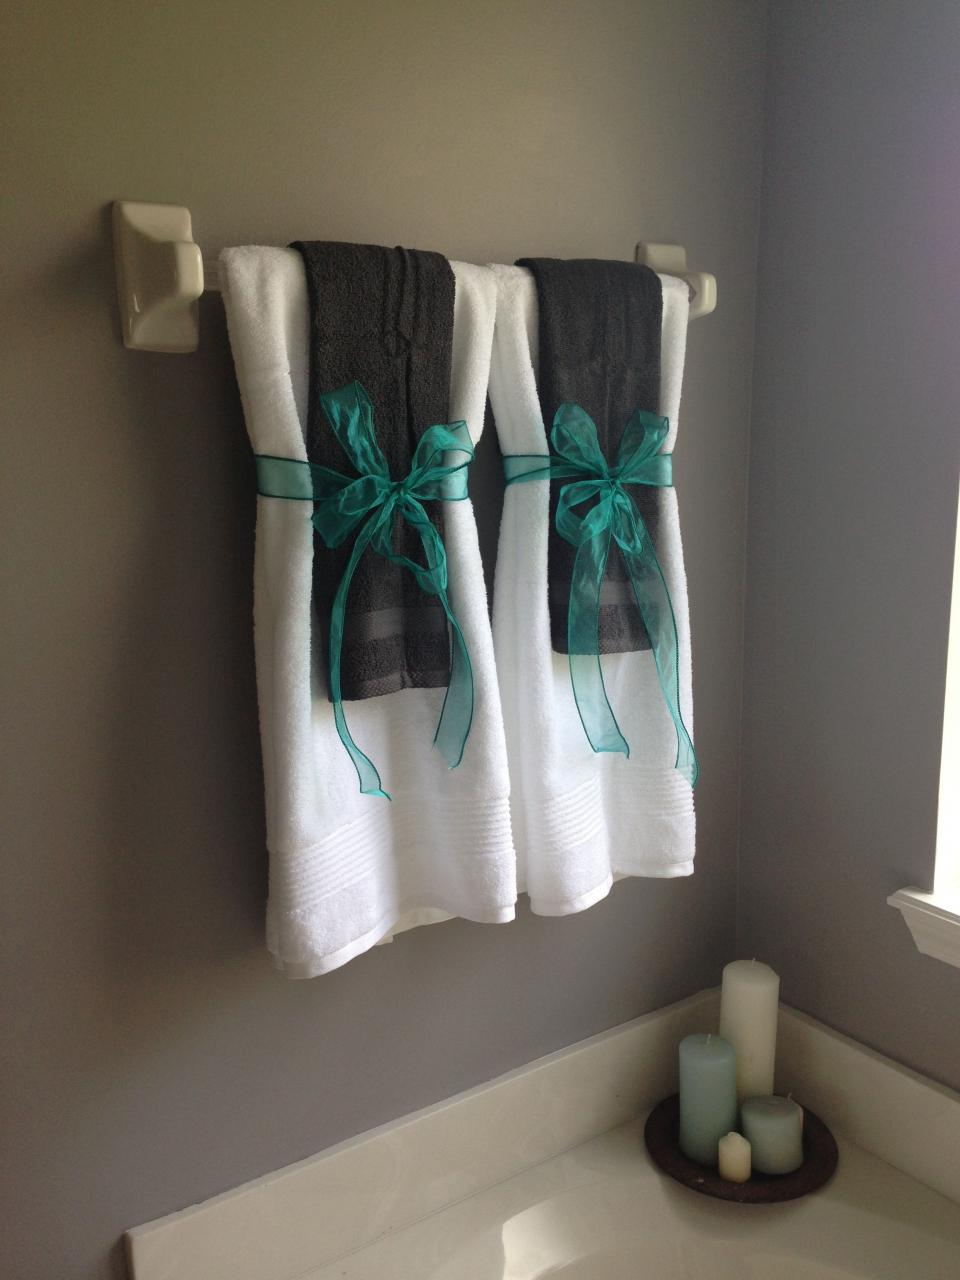 Pin by Tamia Young on For the Home Teal bathroom decor, Bathroom